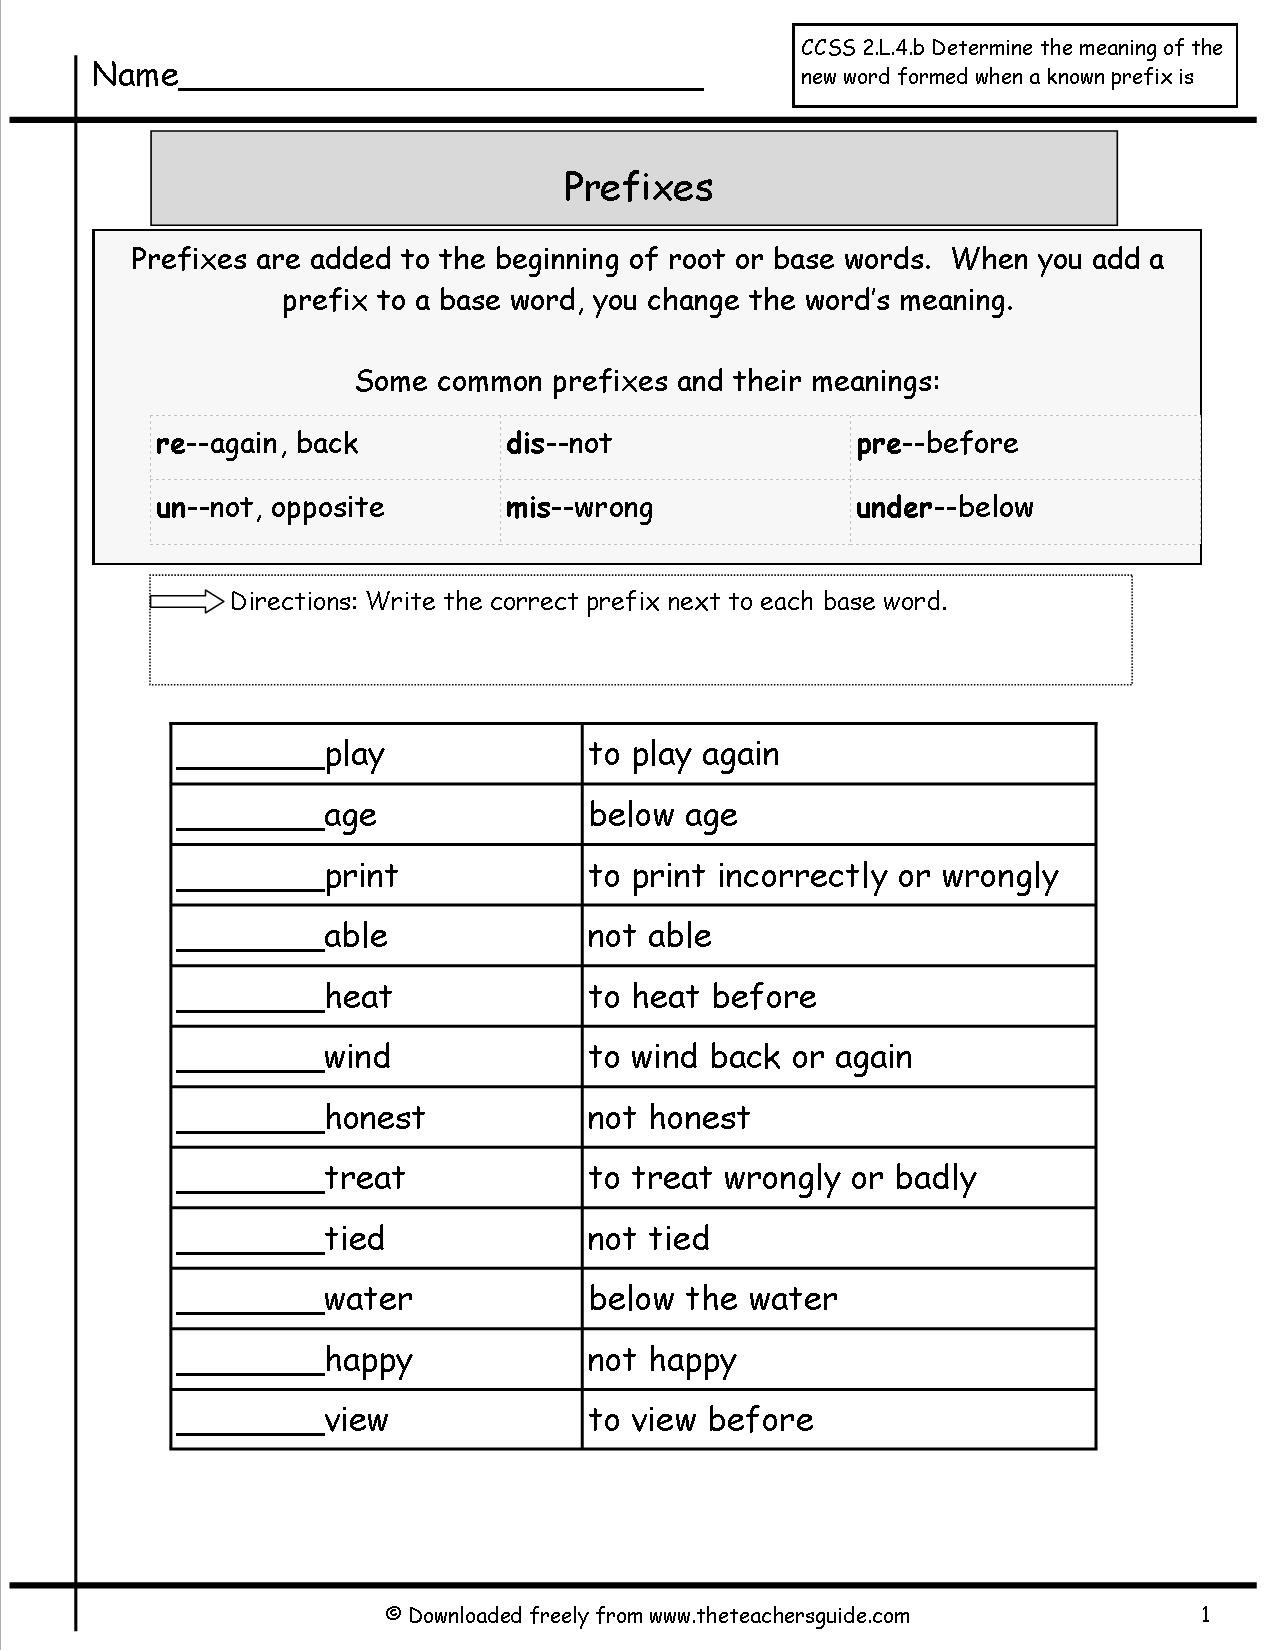 Prefixes Worksheets 4th Grade Free Prefixes and Suffixes Worksheets From the Teacher S Guide